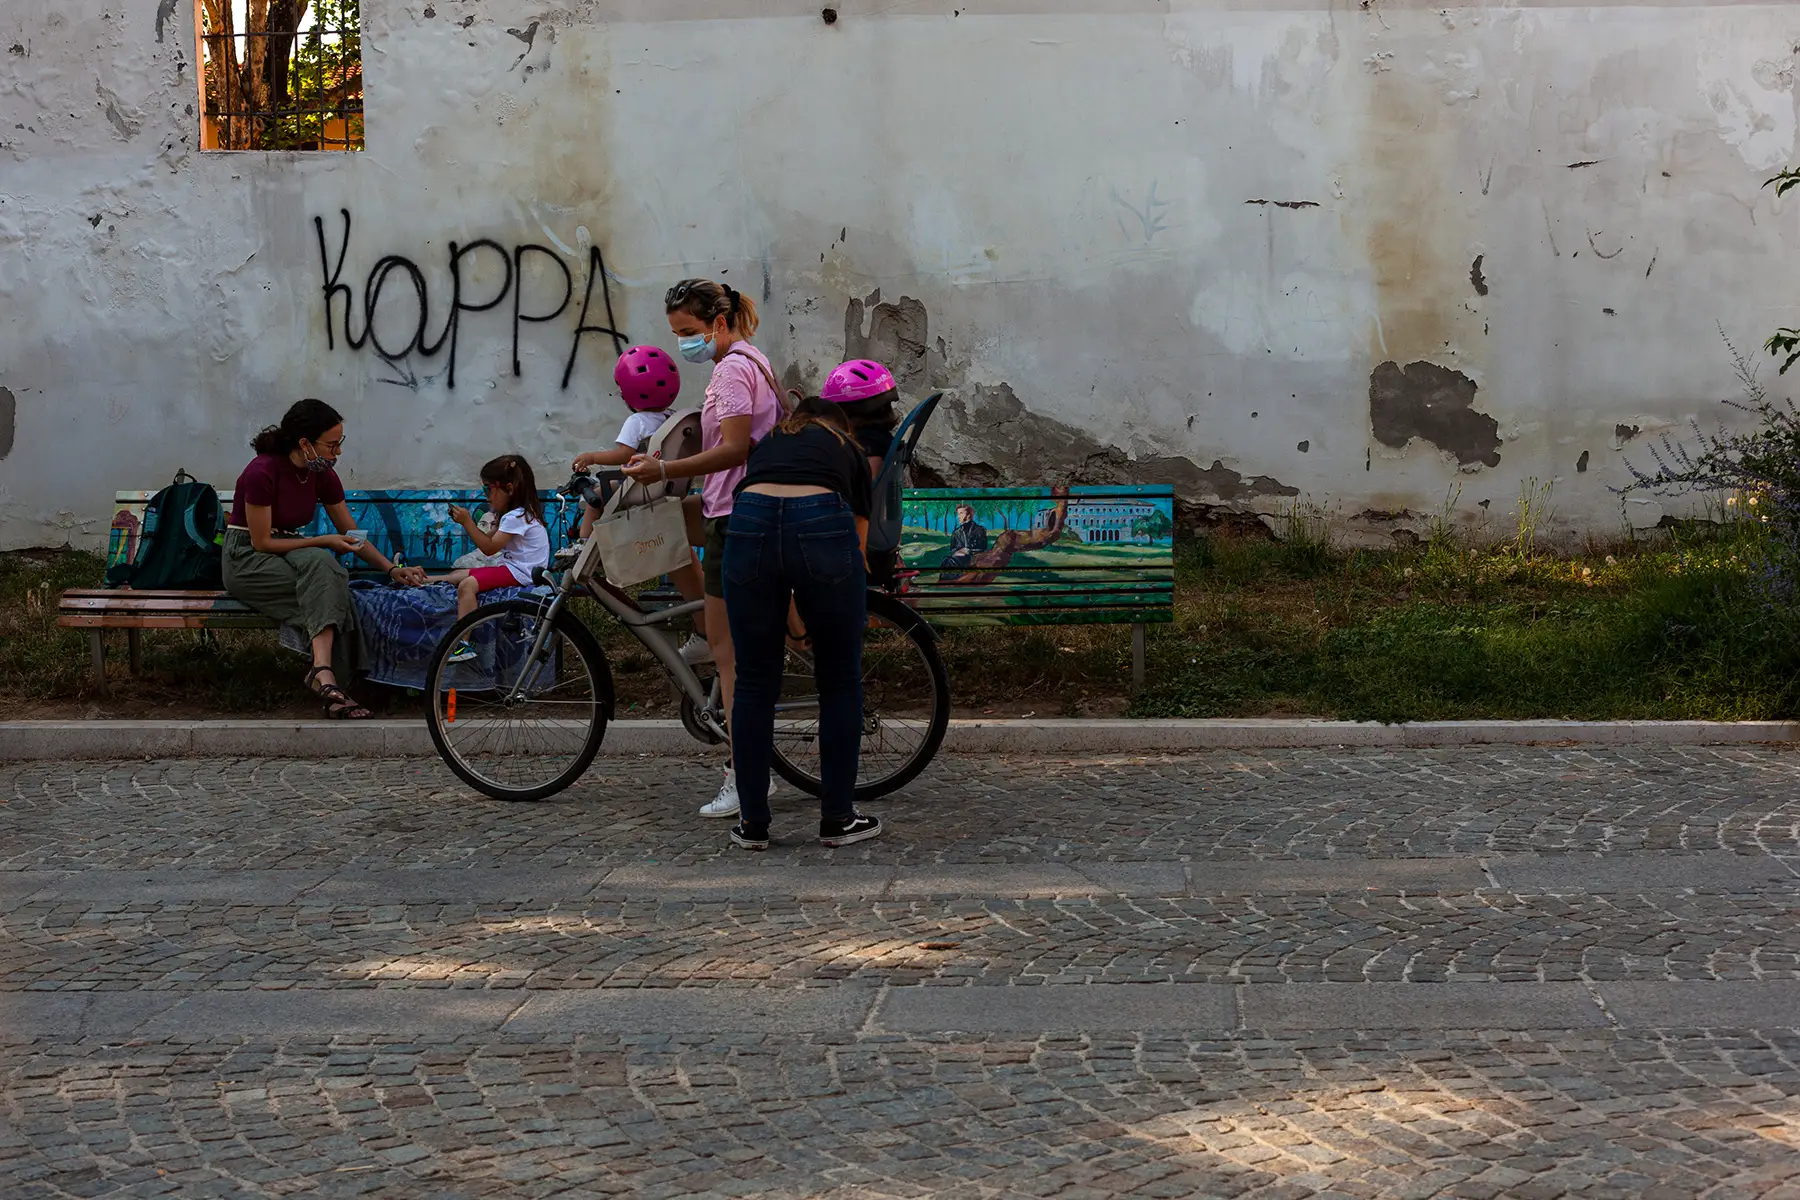 A woman putting two children on a bicycle